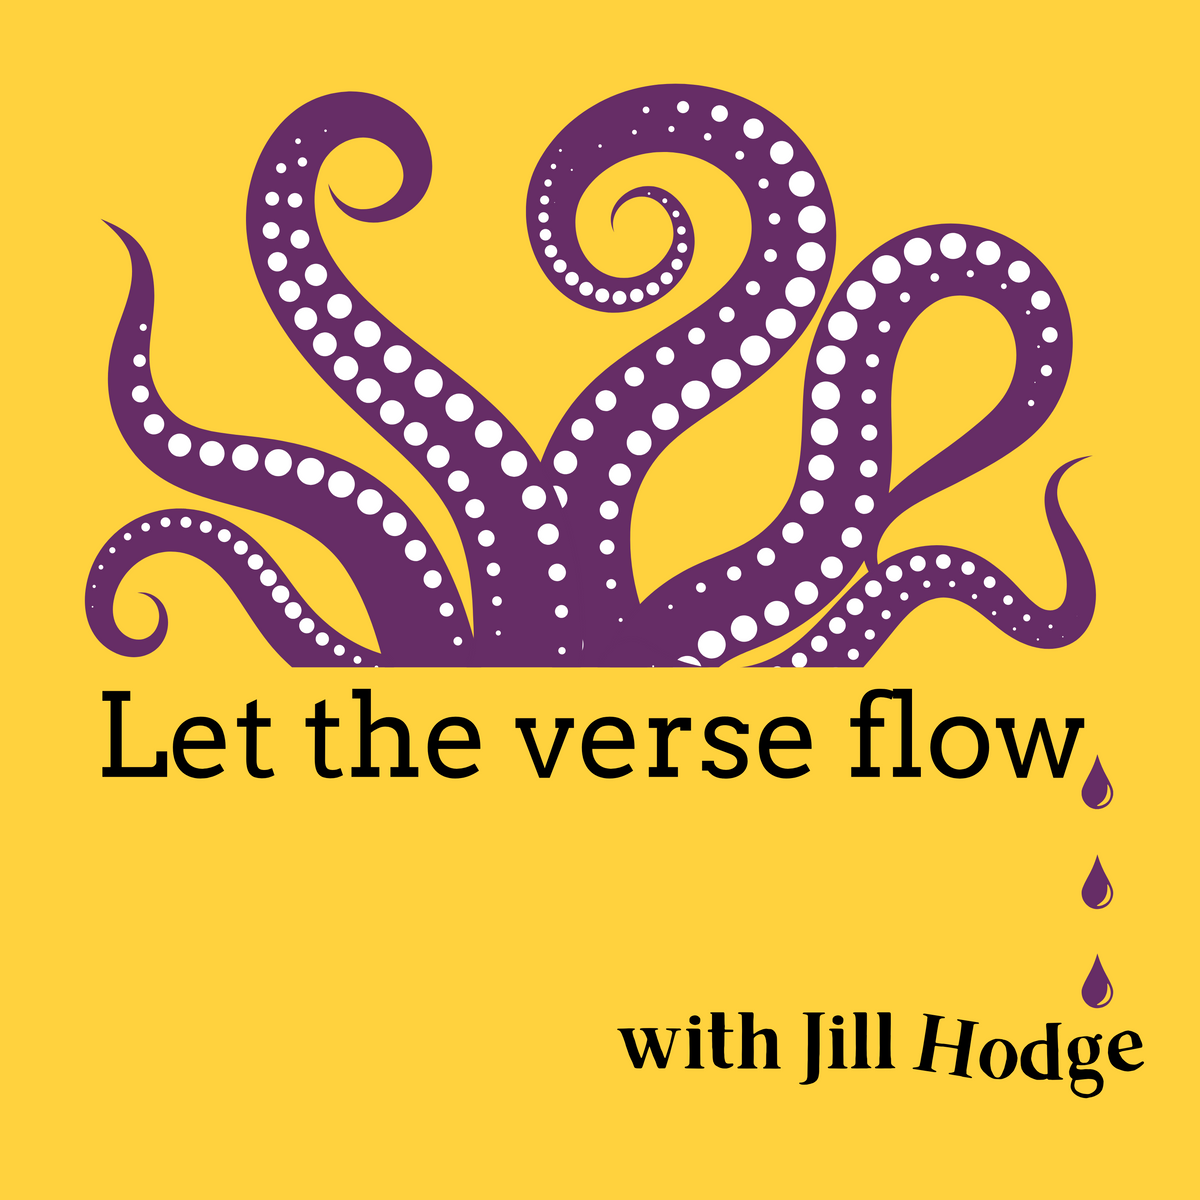 Cover Art for the Let the Verse Flow podcast -- yellow background with a purple octopus tentacle graphic and drops of ink